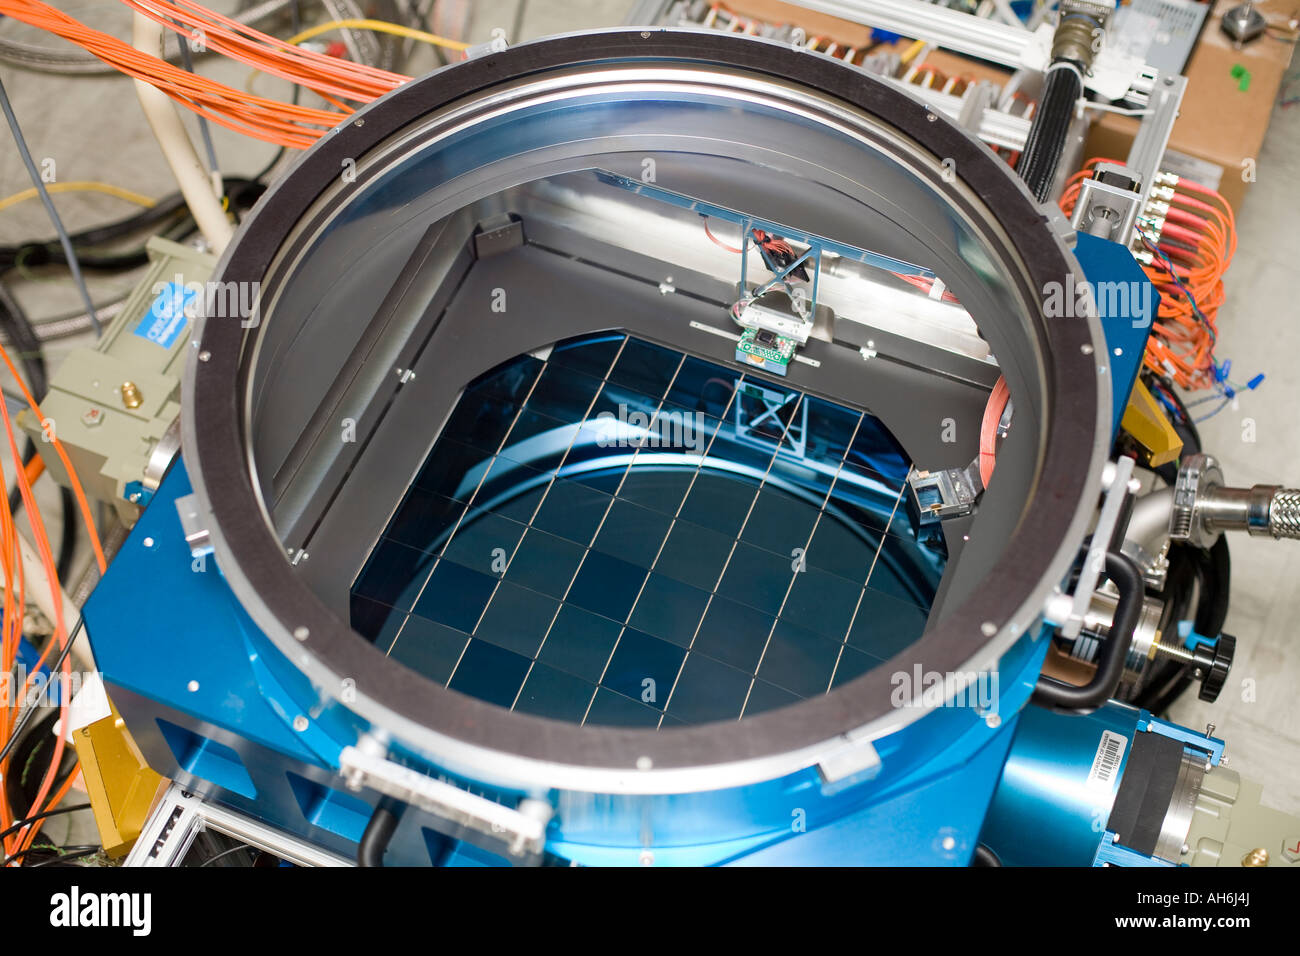 Ccd telescope hi-res stock photography and images - Alamy